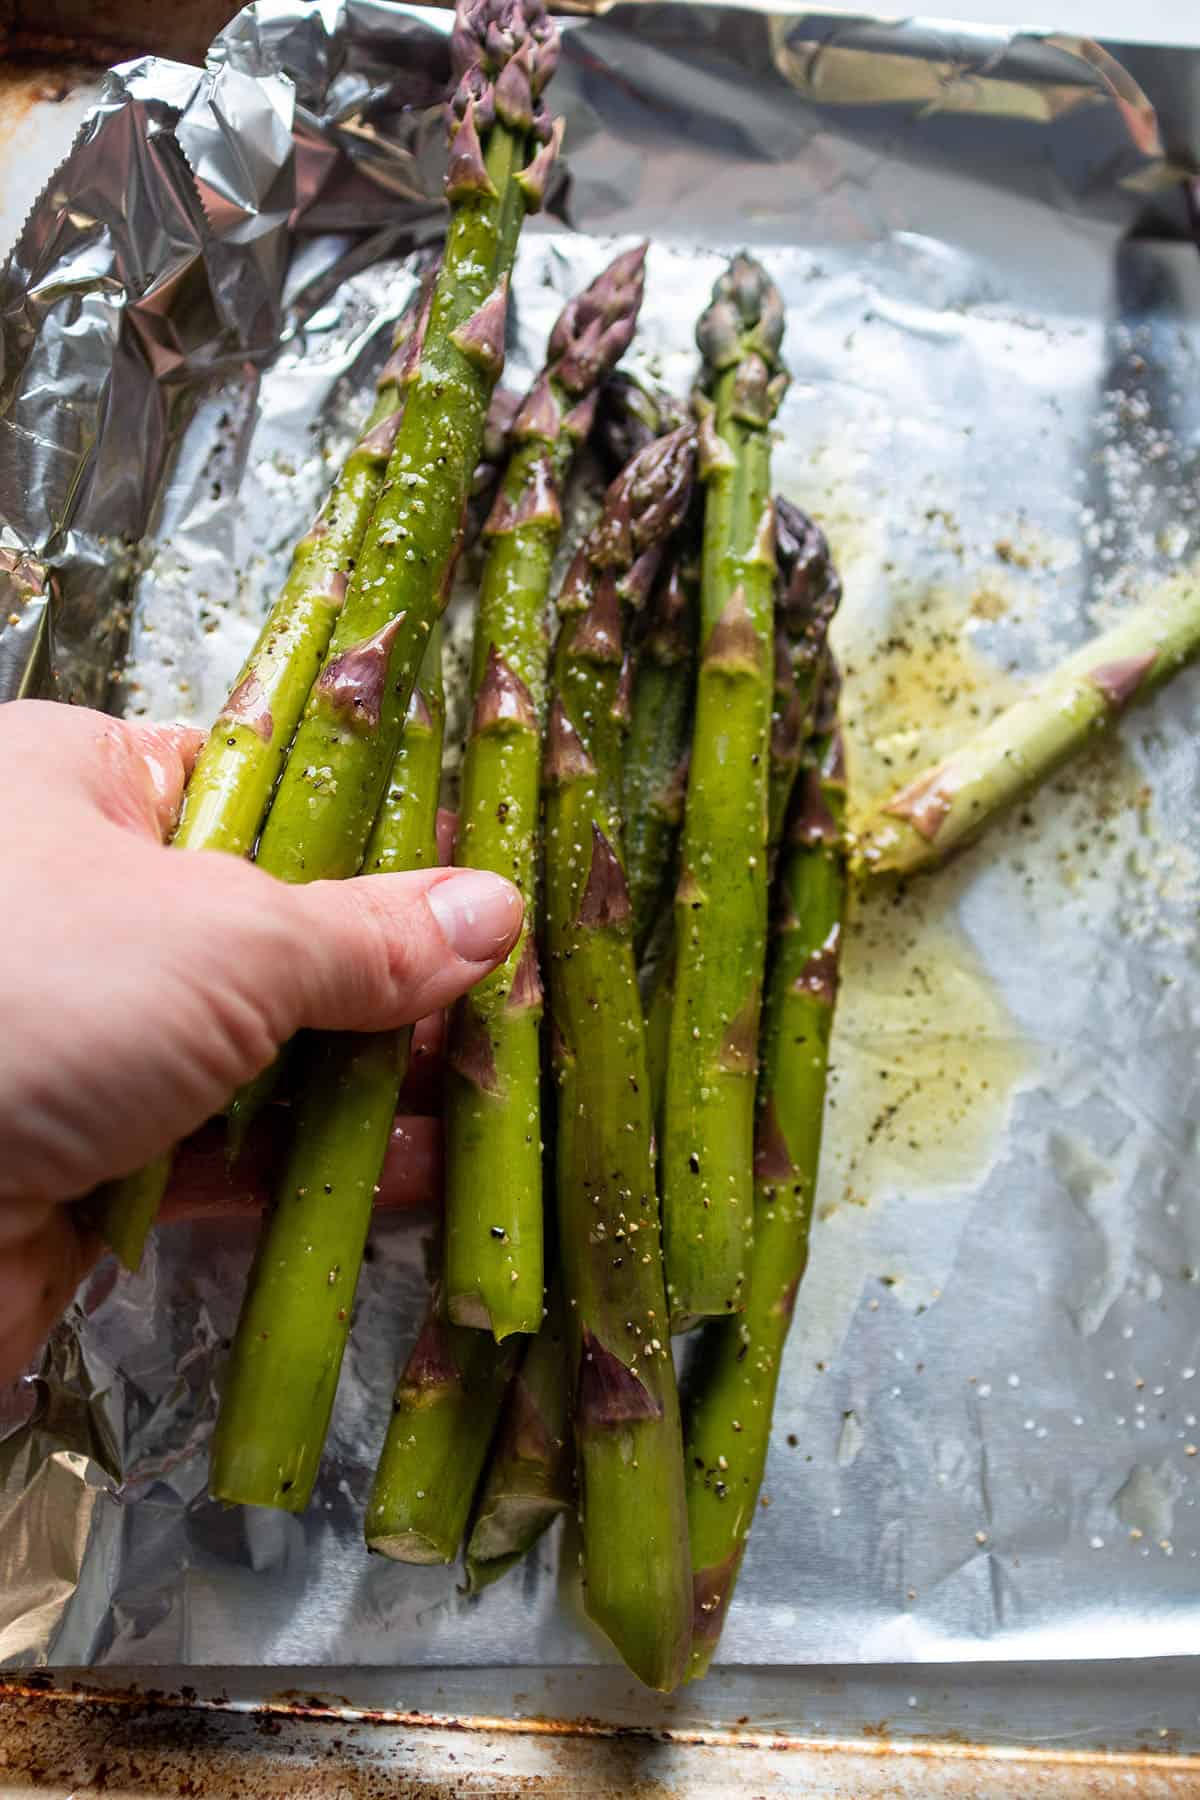 A hand tossing asparagus to evenly coat it with the olive oil, salt and pepper.